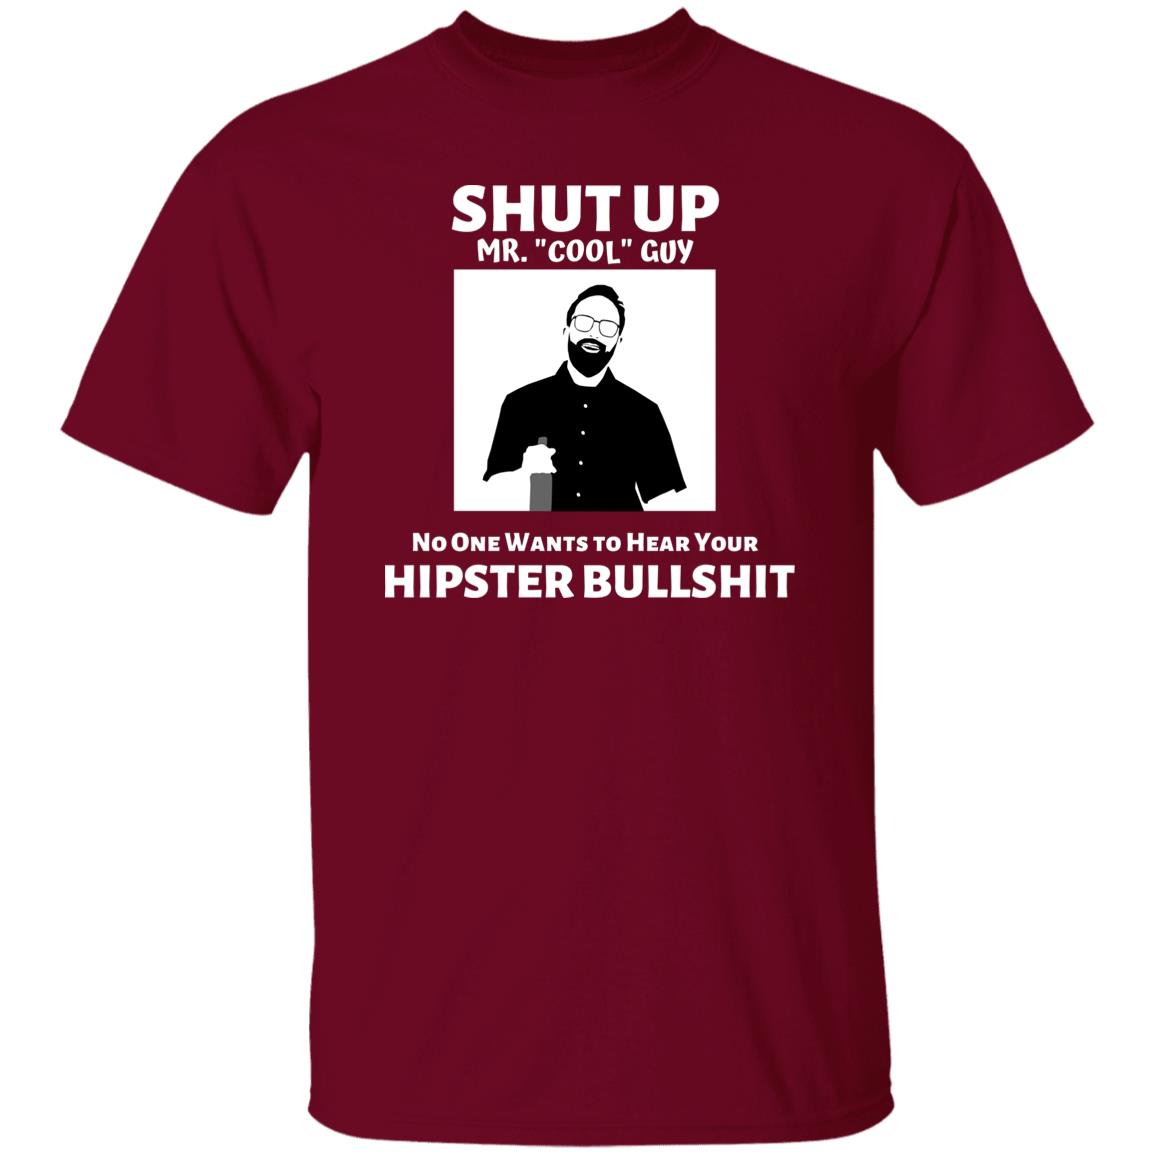 Funny Anti-Hipster T-Shirt, Sarcastic Mr. Cool Guy shirt, Funny Hipster shirt, Funny Offensive shirt